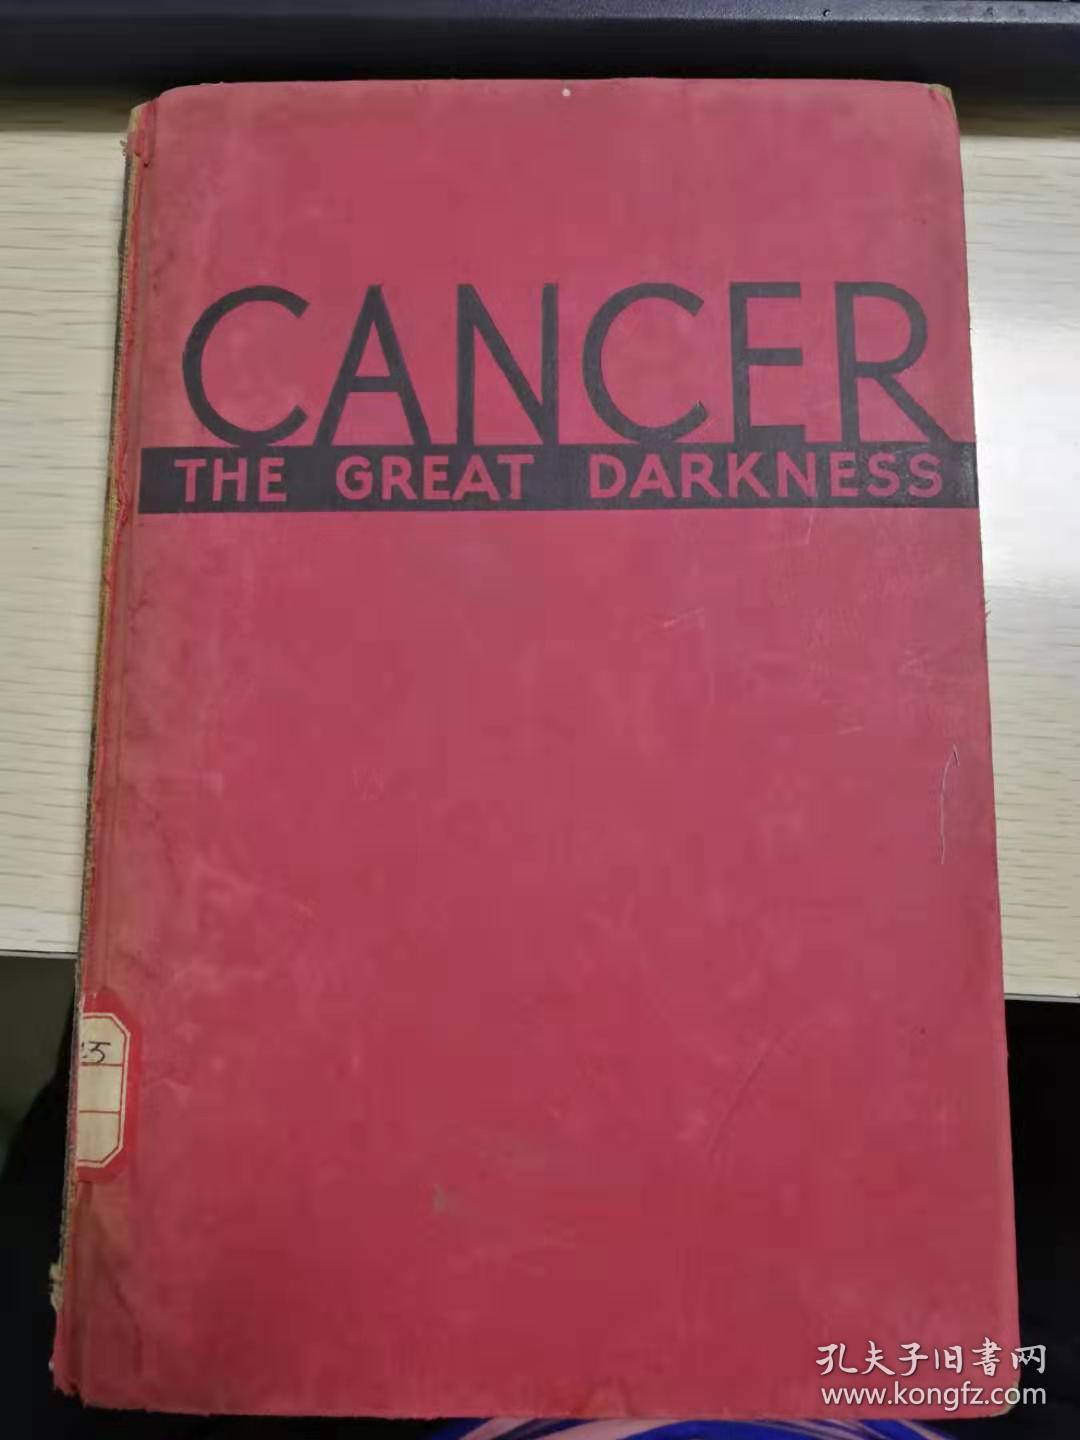 CANCER THE GREAT DARKNES S (癌 伟大的黑暗精灵